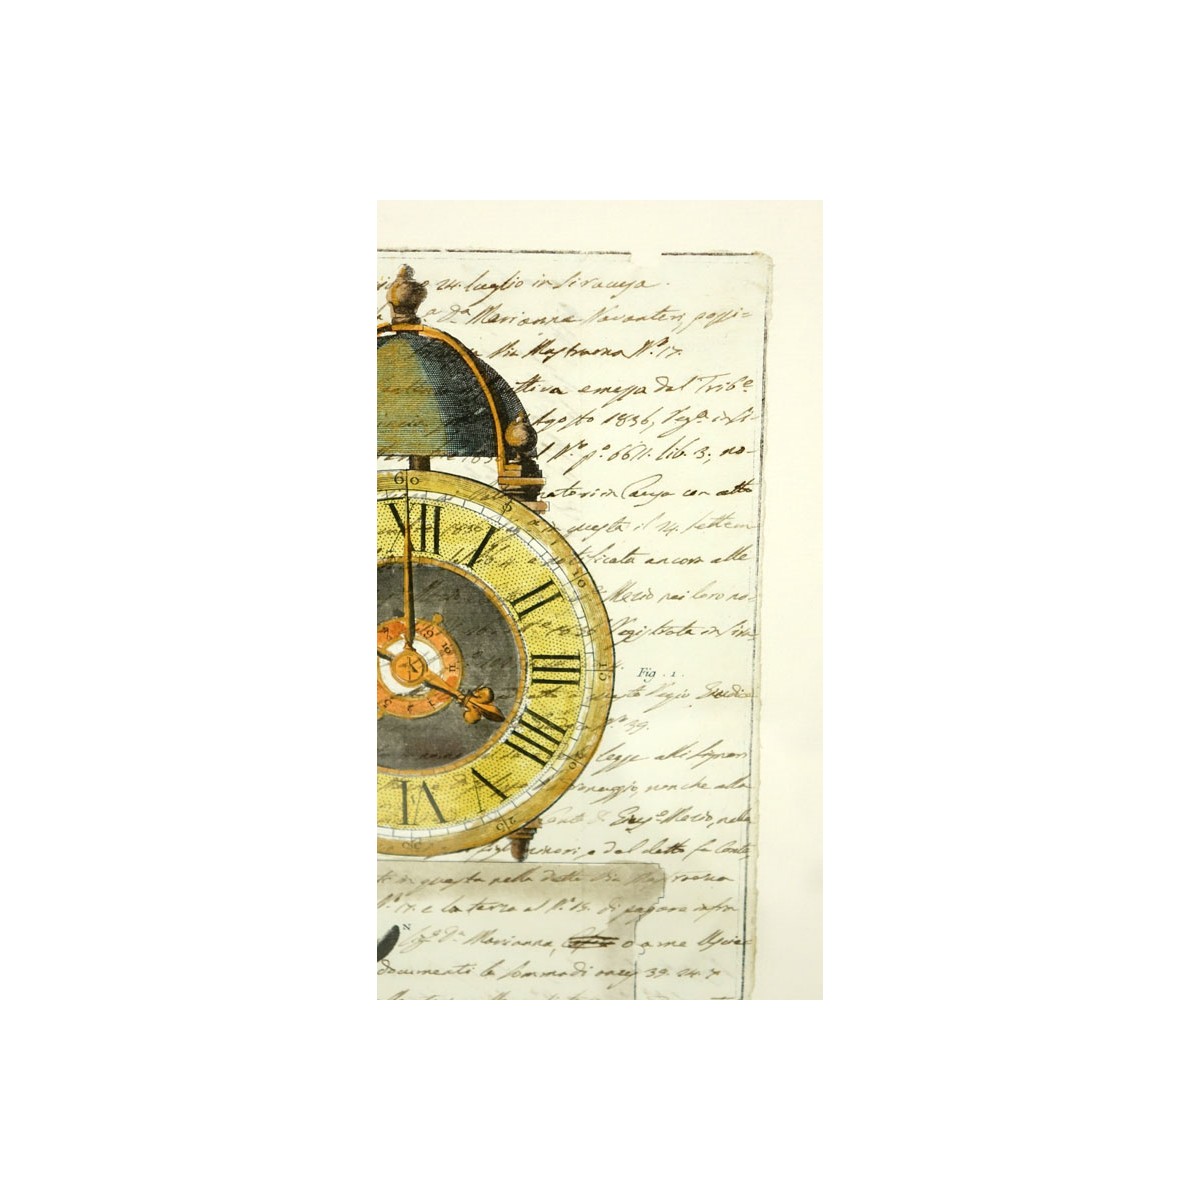 19th Century (1836) document with hand painted per